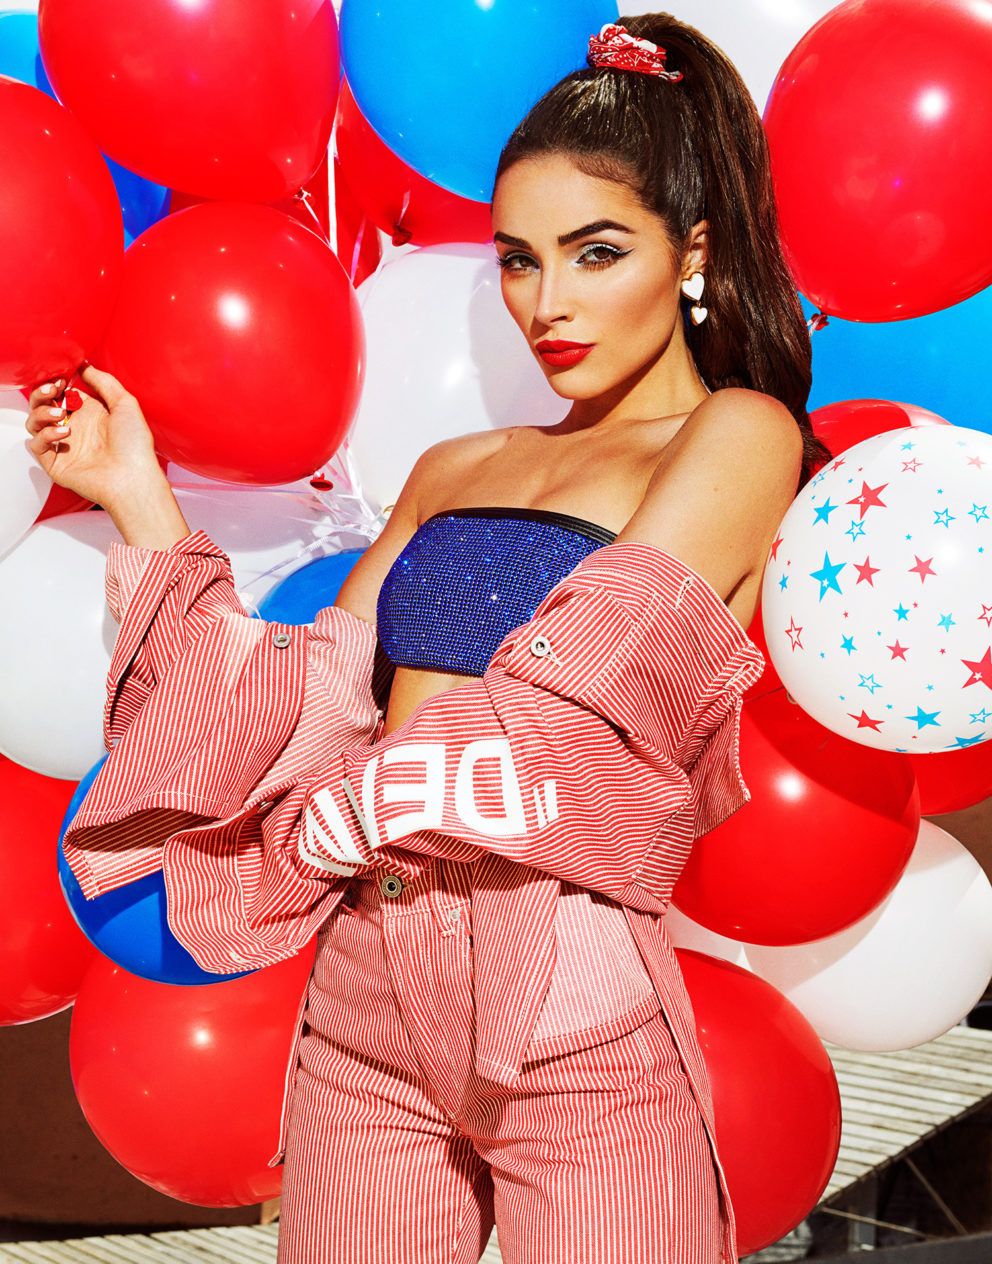 180615 Sbjct Olivia Culpo By Christian Hogstedt 08